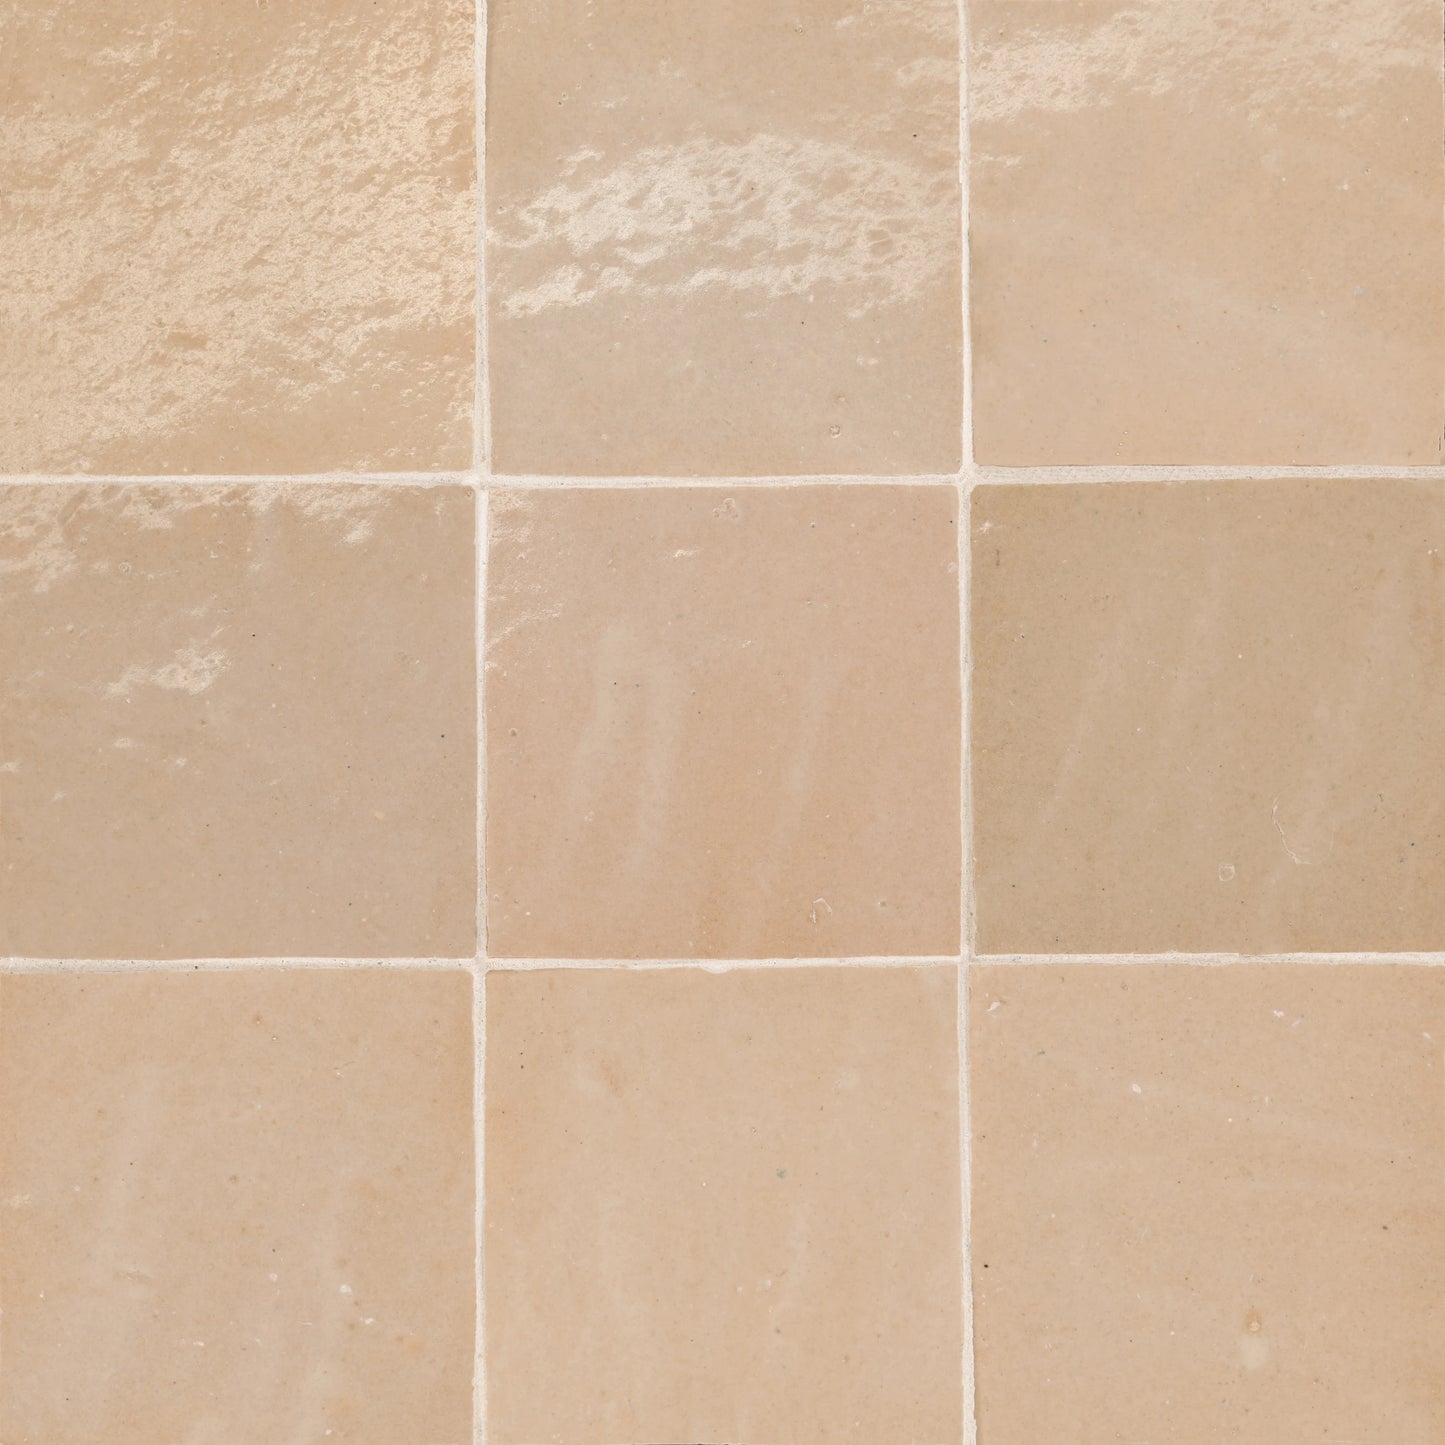 Tunis Zellige Tile Glossy in Ivory 4" x 4"